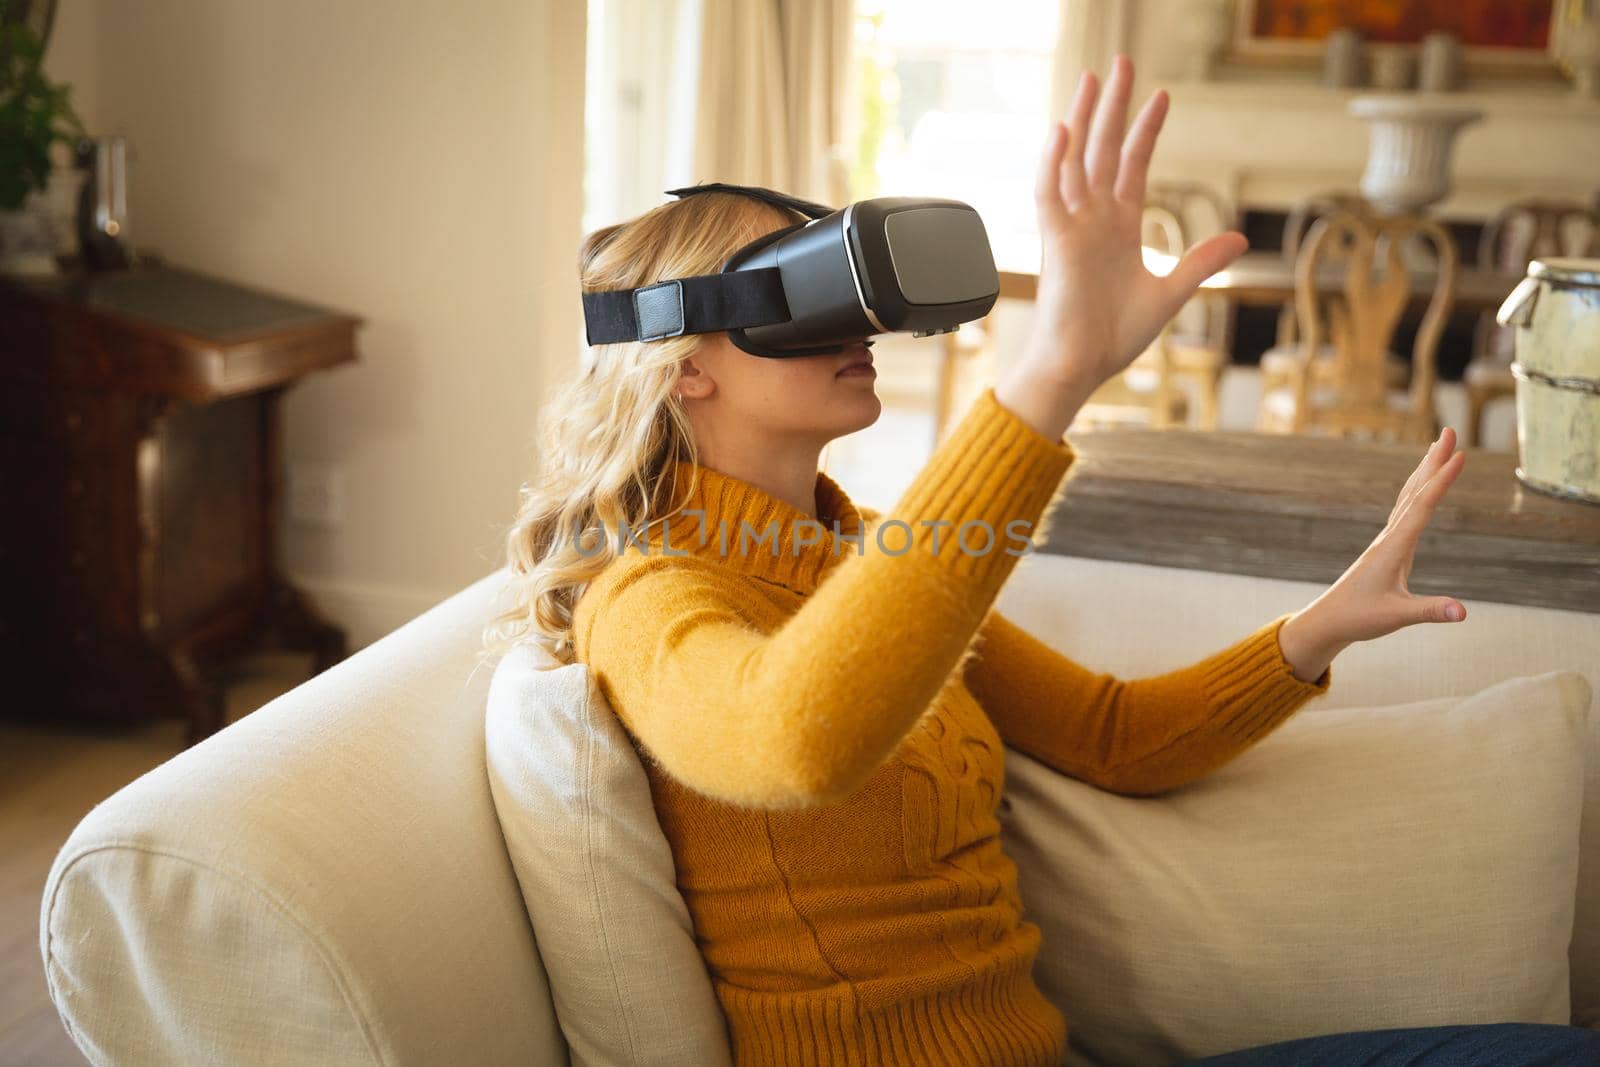 Caucasian woman sitting on couch in luxury living room wearing vr headset, with hands raised by Wavebreakmedia